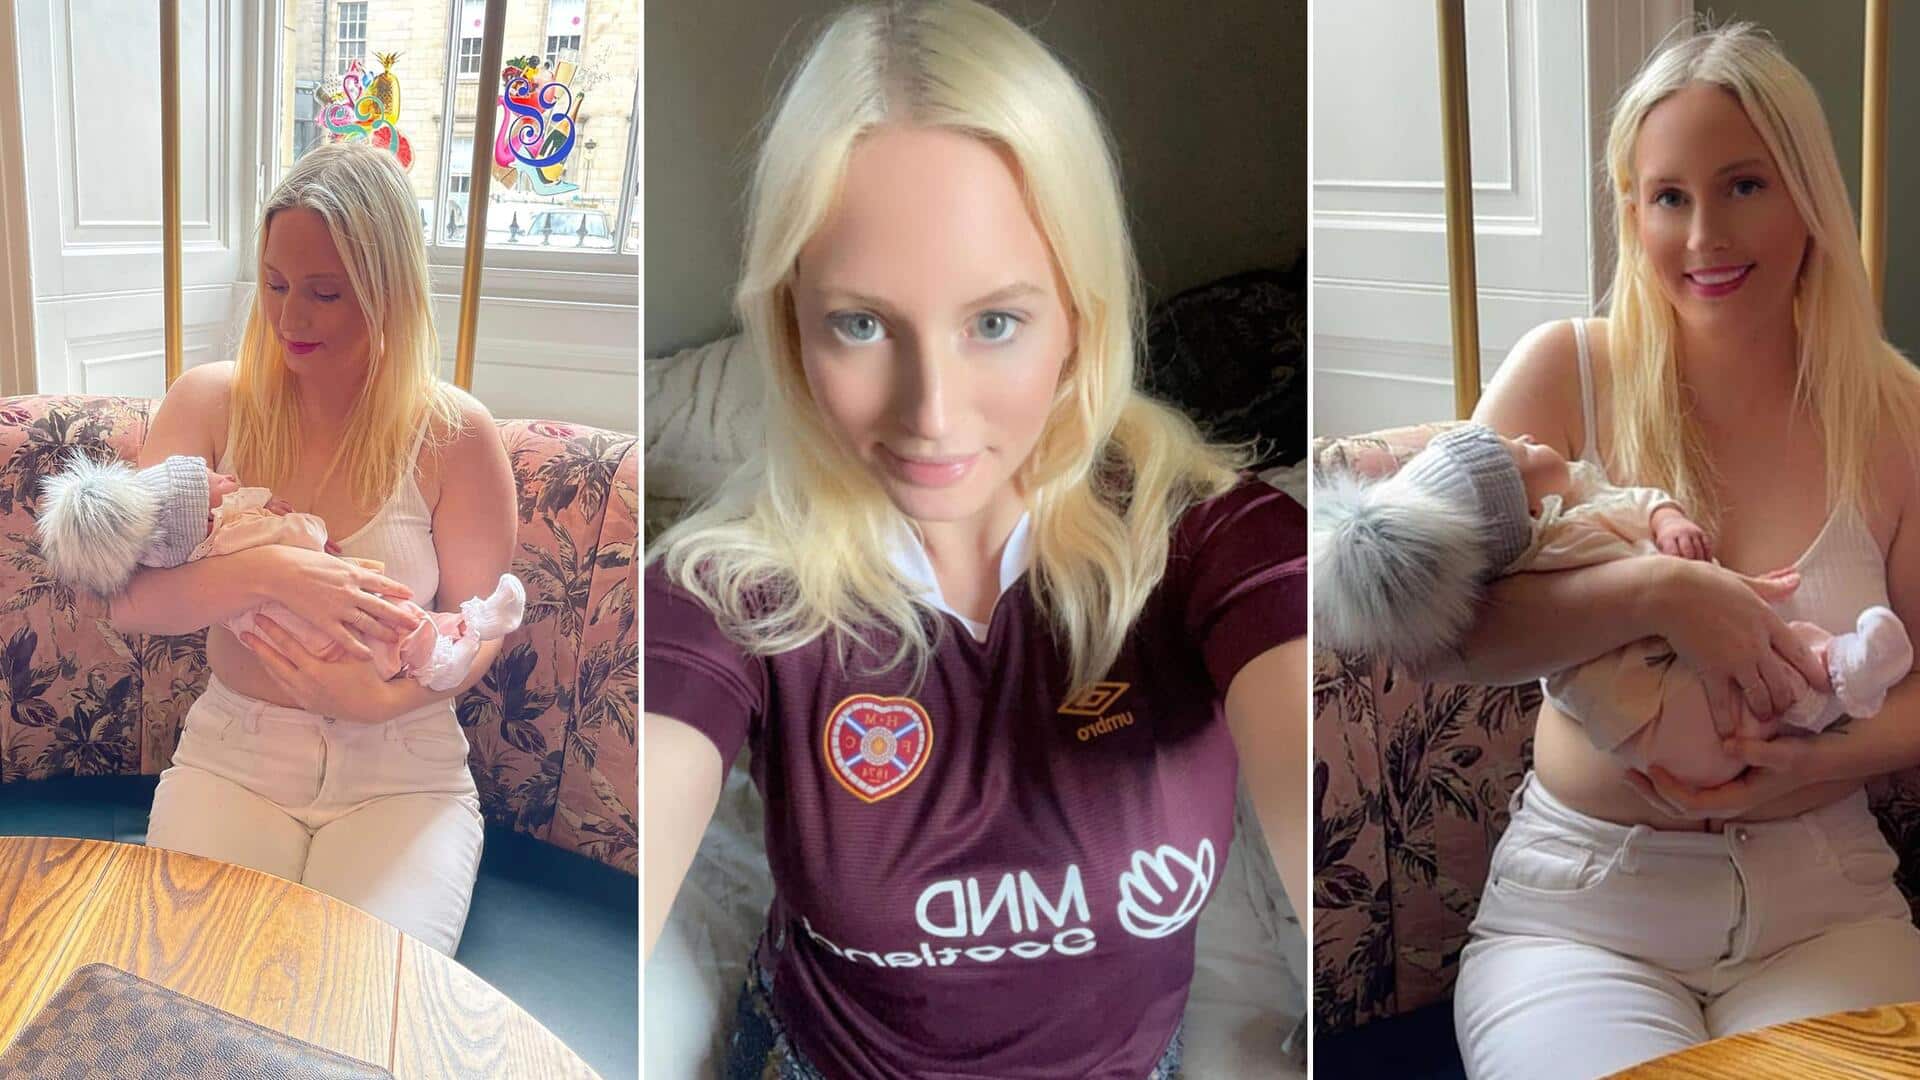 UK: This 34-year-old grandmom is often mistaken for daughter's sister 